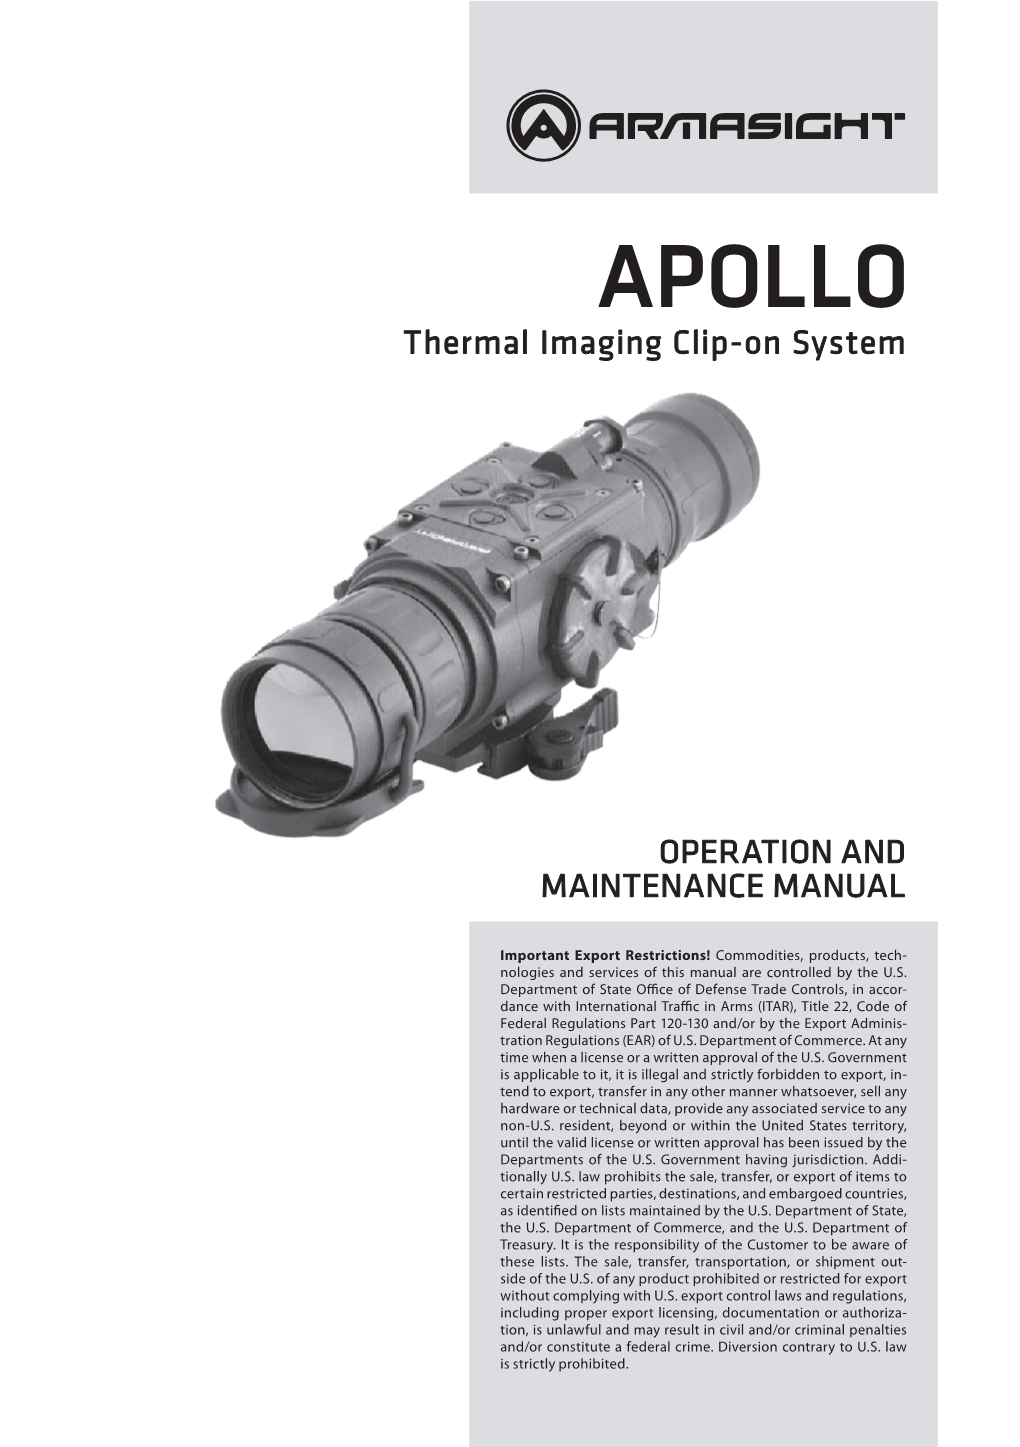 Apollo Thermal Imaging Clip-On System